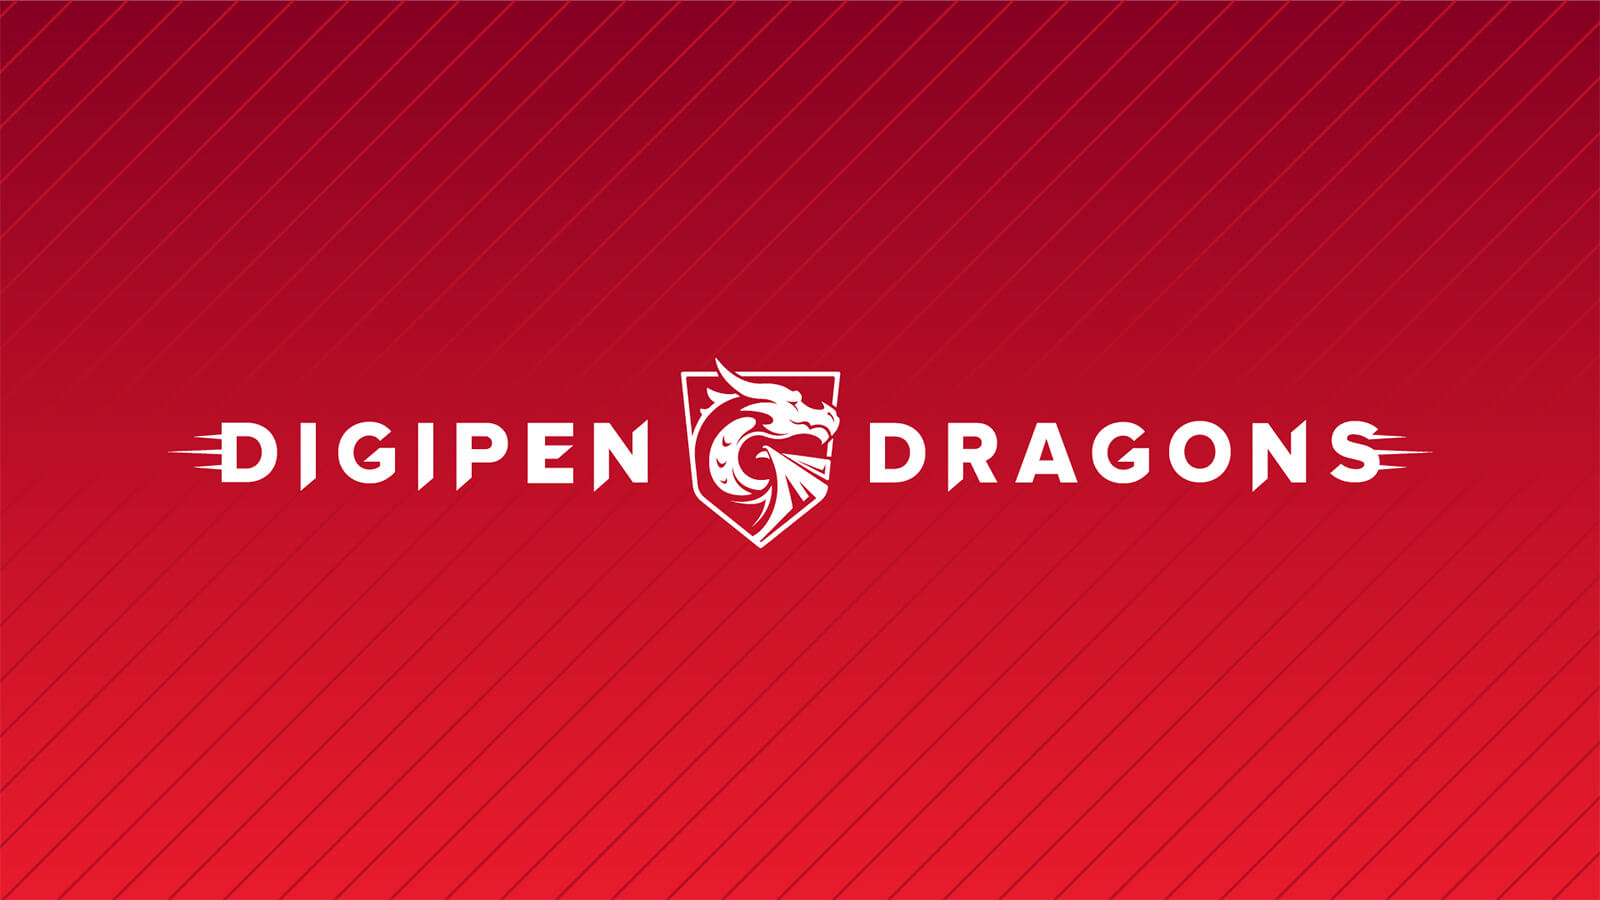 DigiPen Dragon mascot on red striped background